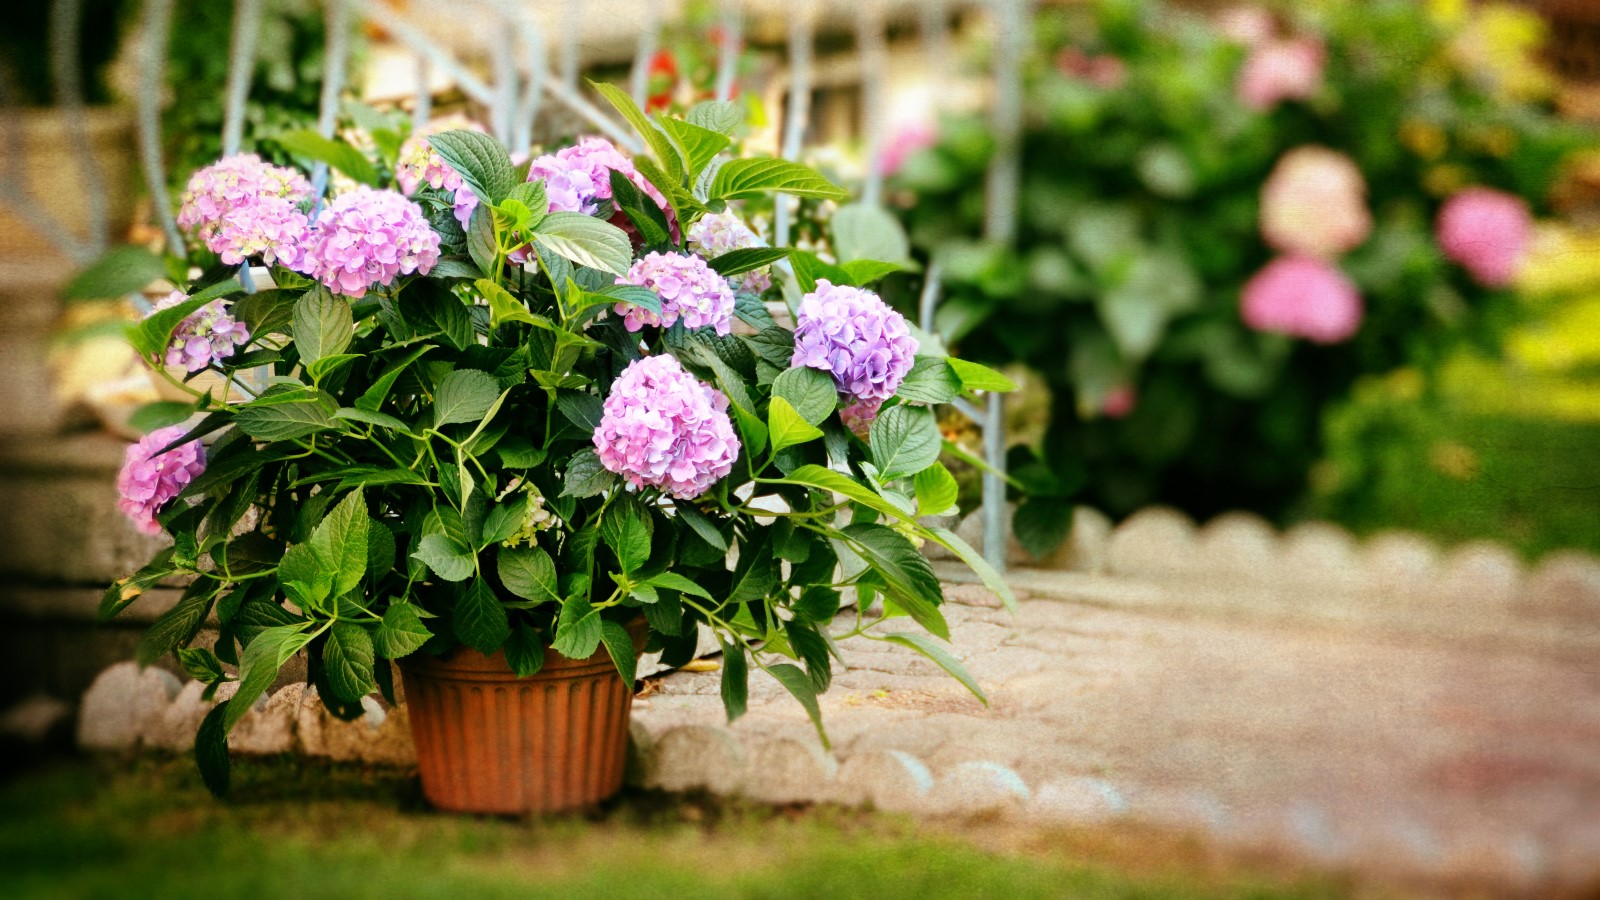 Image of Hydrangea ericaceous plant in pot